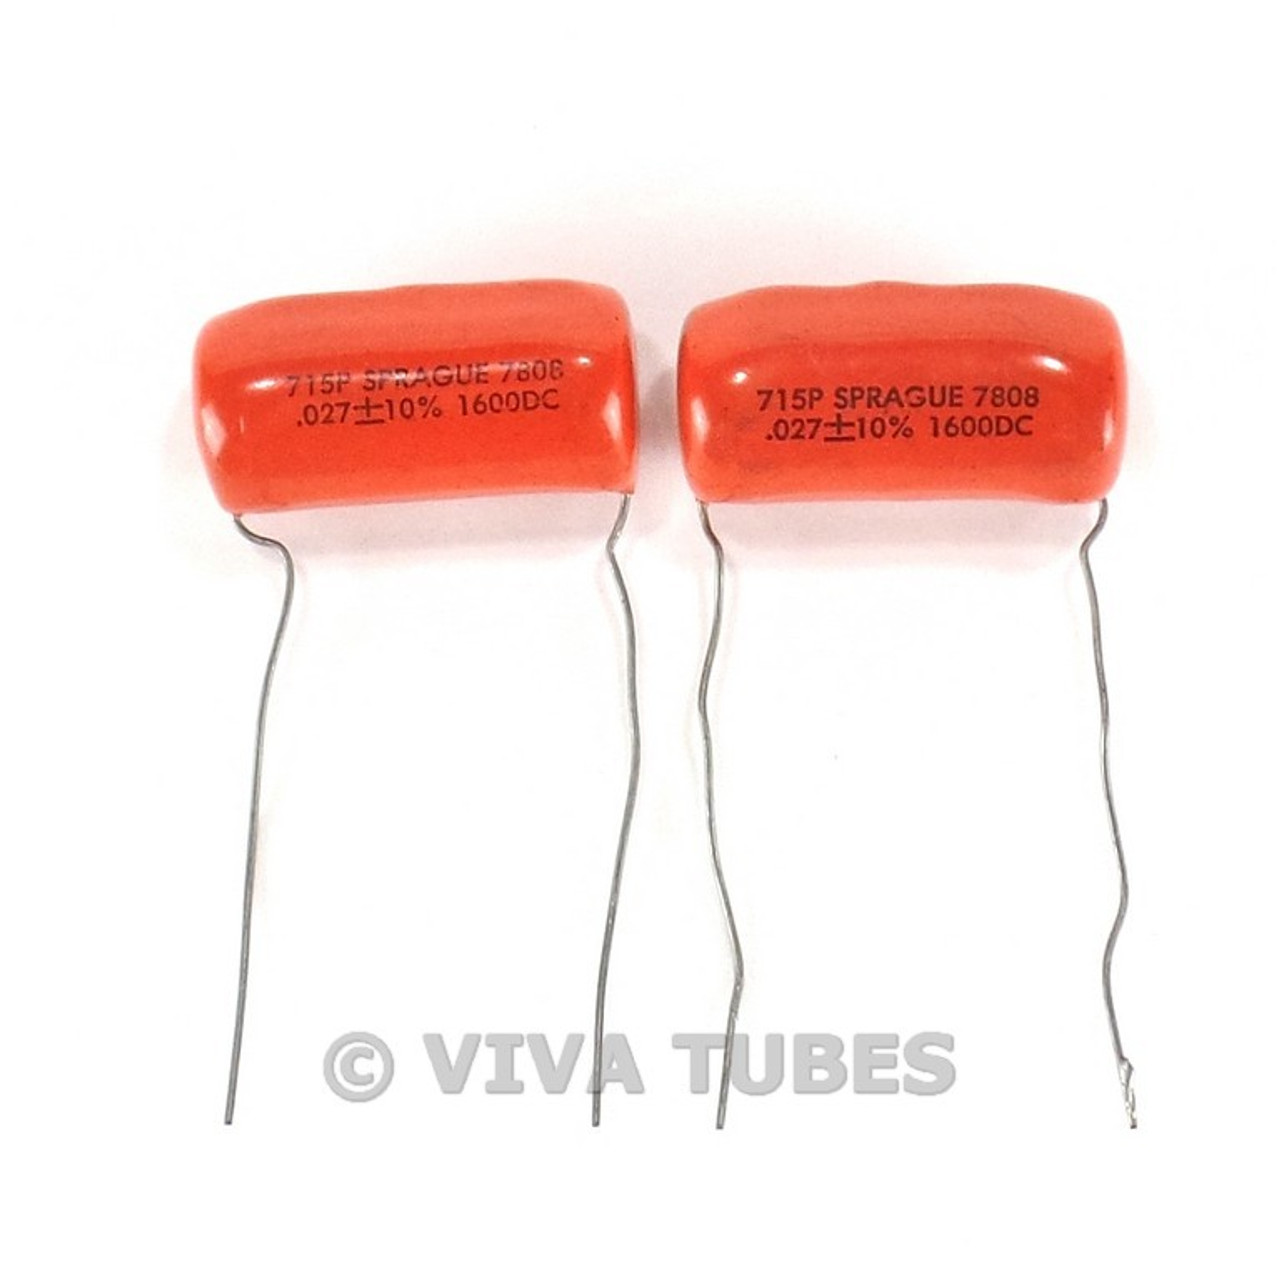 Capacitors Guitar Capacitor Orange Drop 0 22 Mf 600 V Fast Shipping Business Industrial